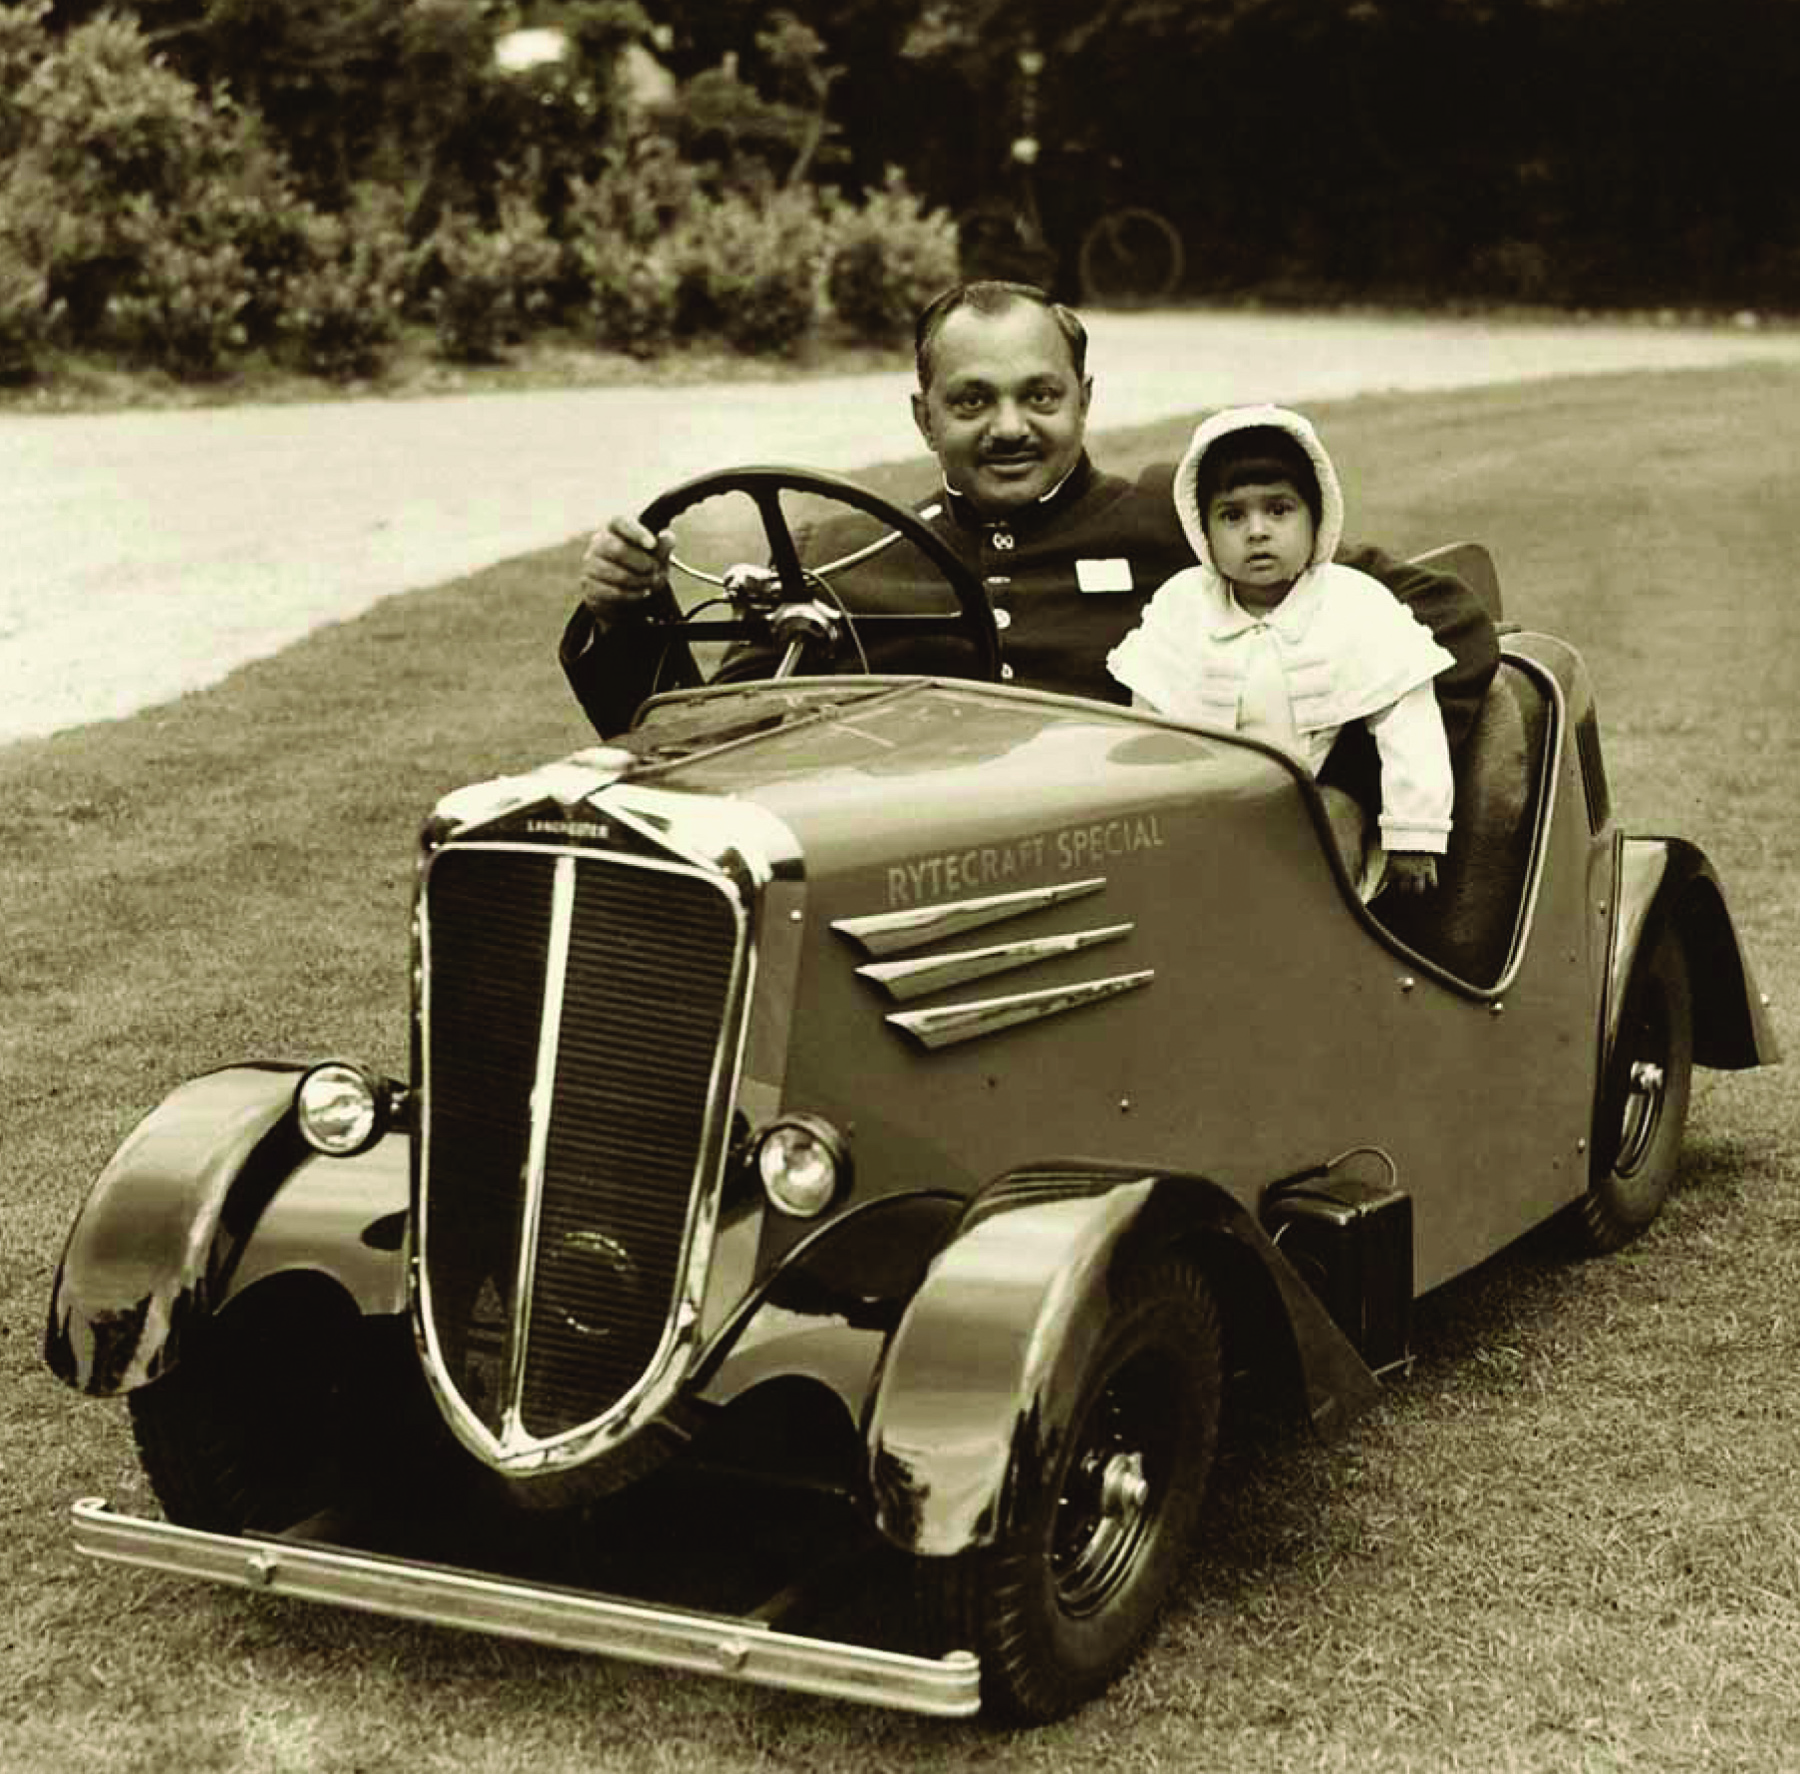 Princess Harshad Kumari with her father, Jam Saheb Digvijaysinhji of Nawanagar, c. 1939.This car was custom-made for the young princess but when admired by the young prince of Jaipur, Bhawani Singh, it was given to him as a birthday present.